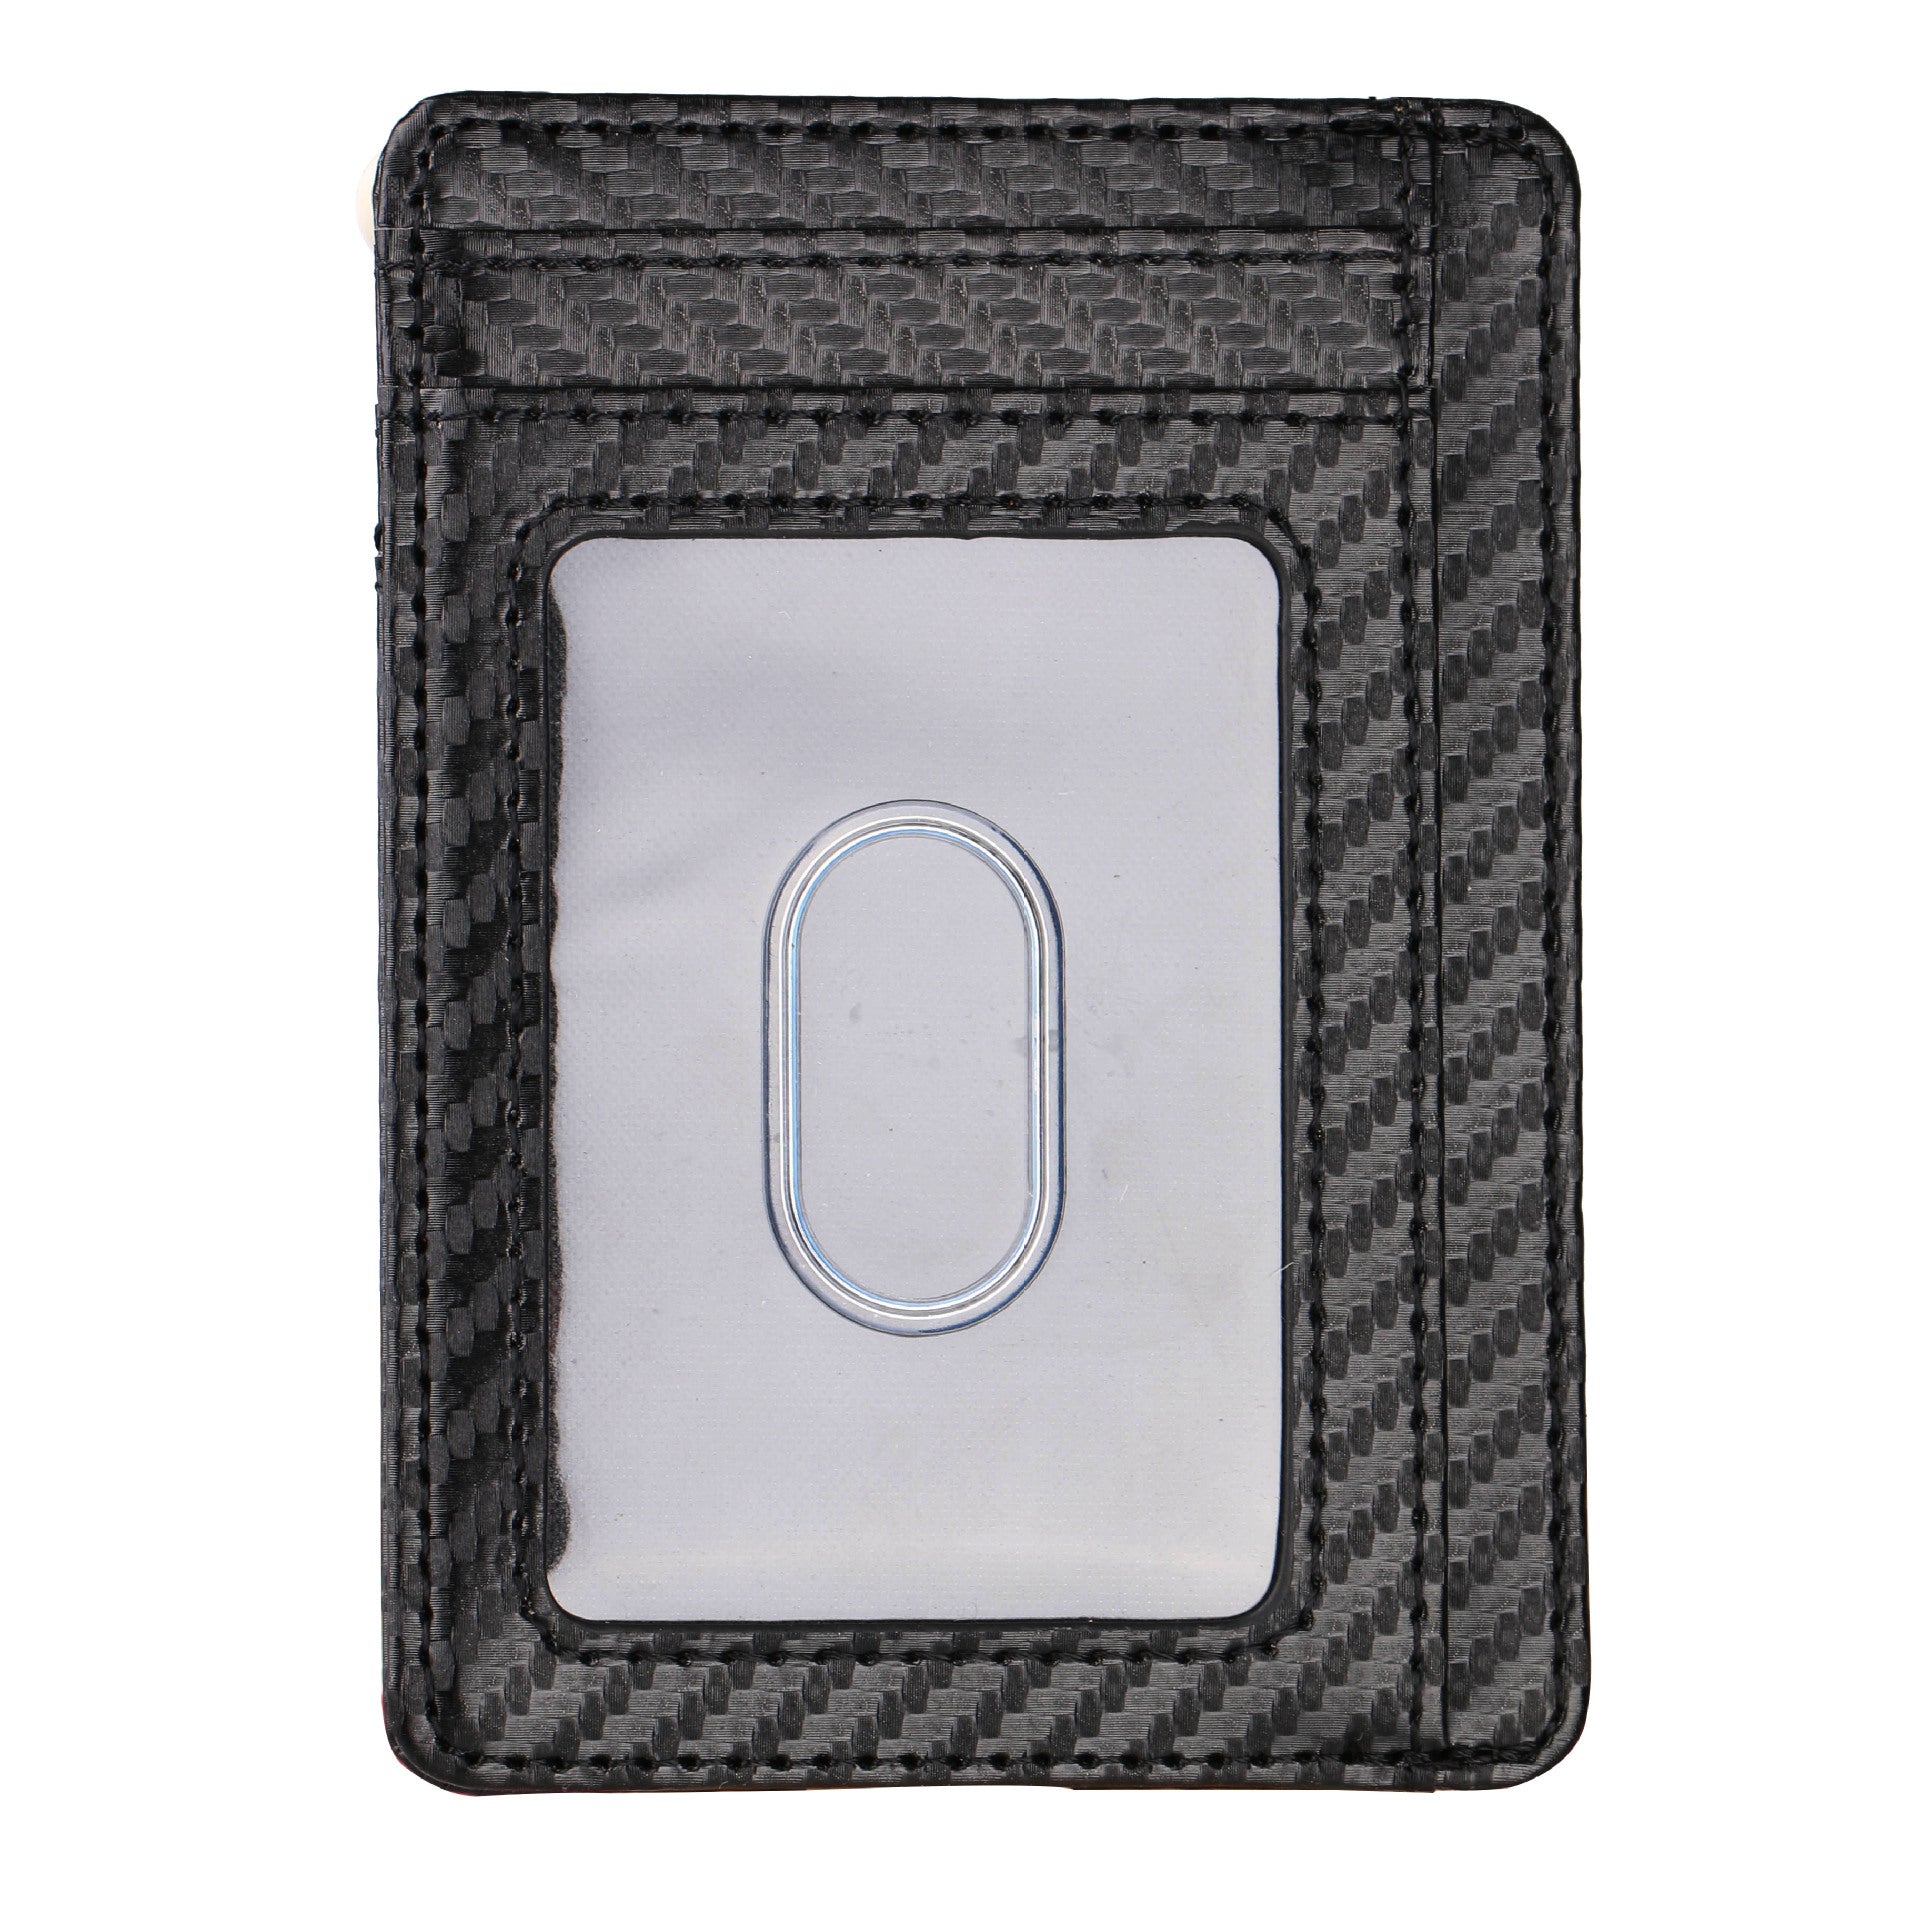 Anti-magnetic And Anti-wear Card Holder ID Card Holder